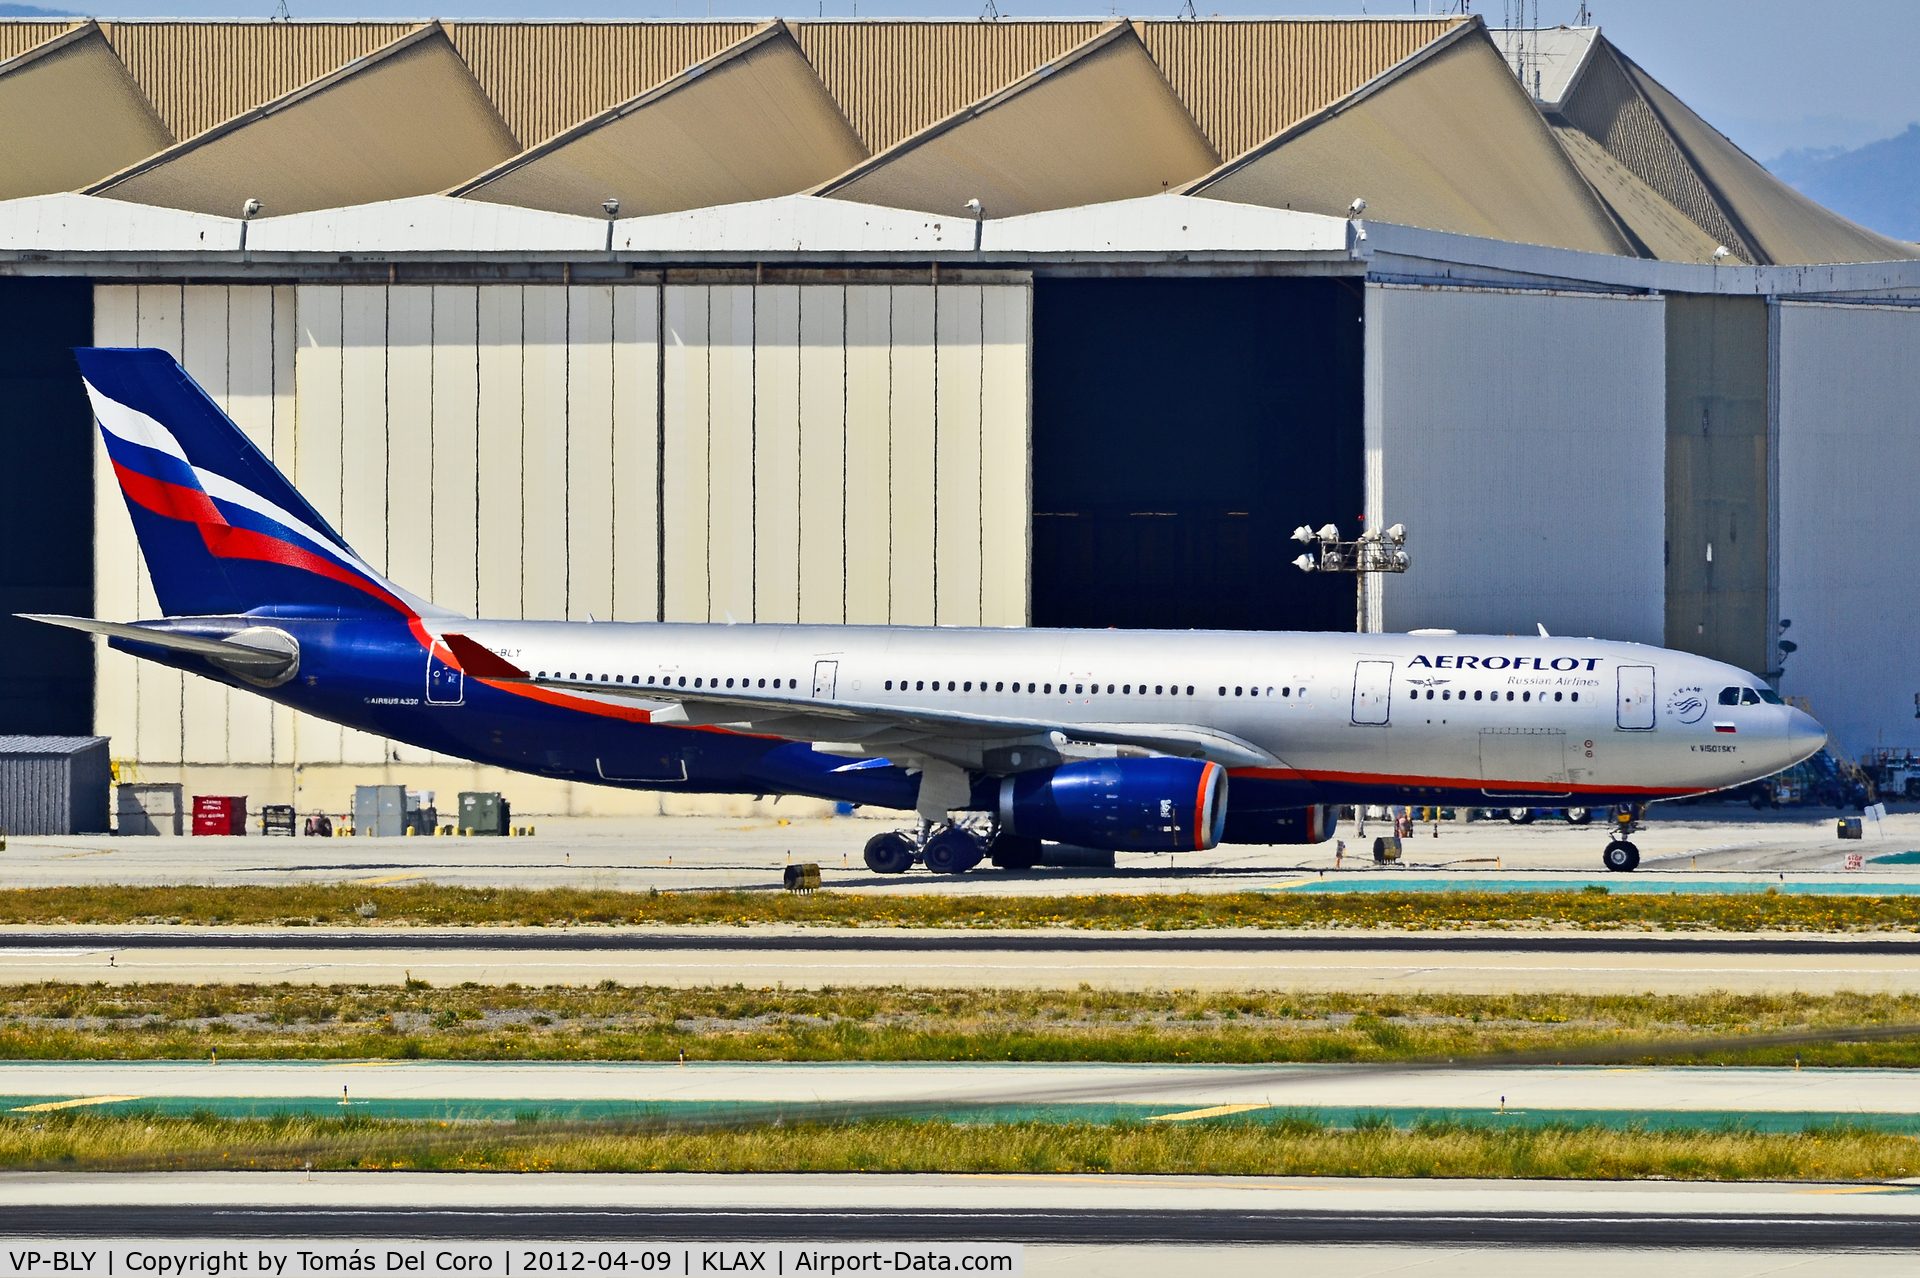 VP-BLY, 2008 Airbus A330-243 C/N 973, VP-BLY Aeroflot - Russian Airlines Airbus A330-243 (cn 973) 